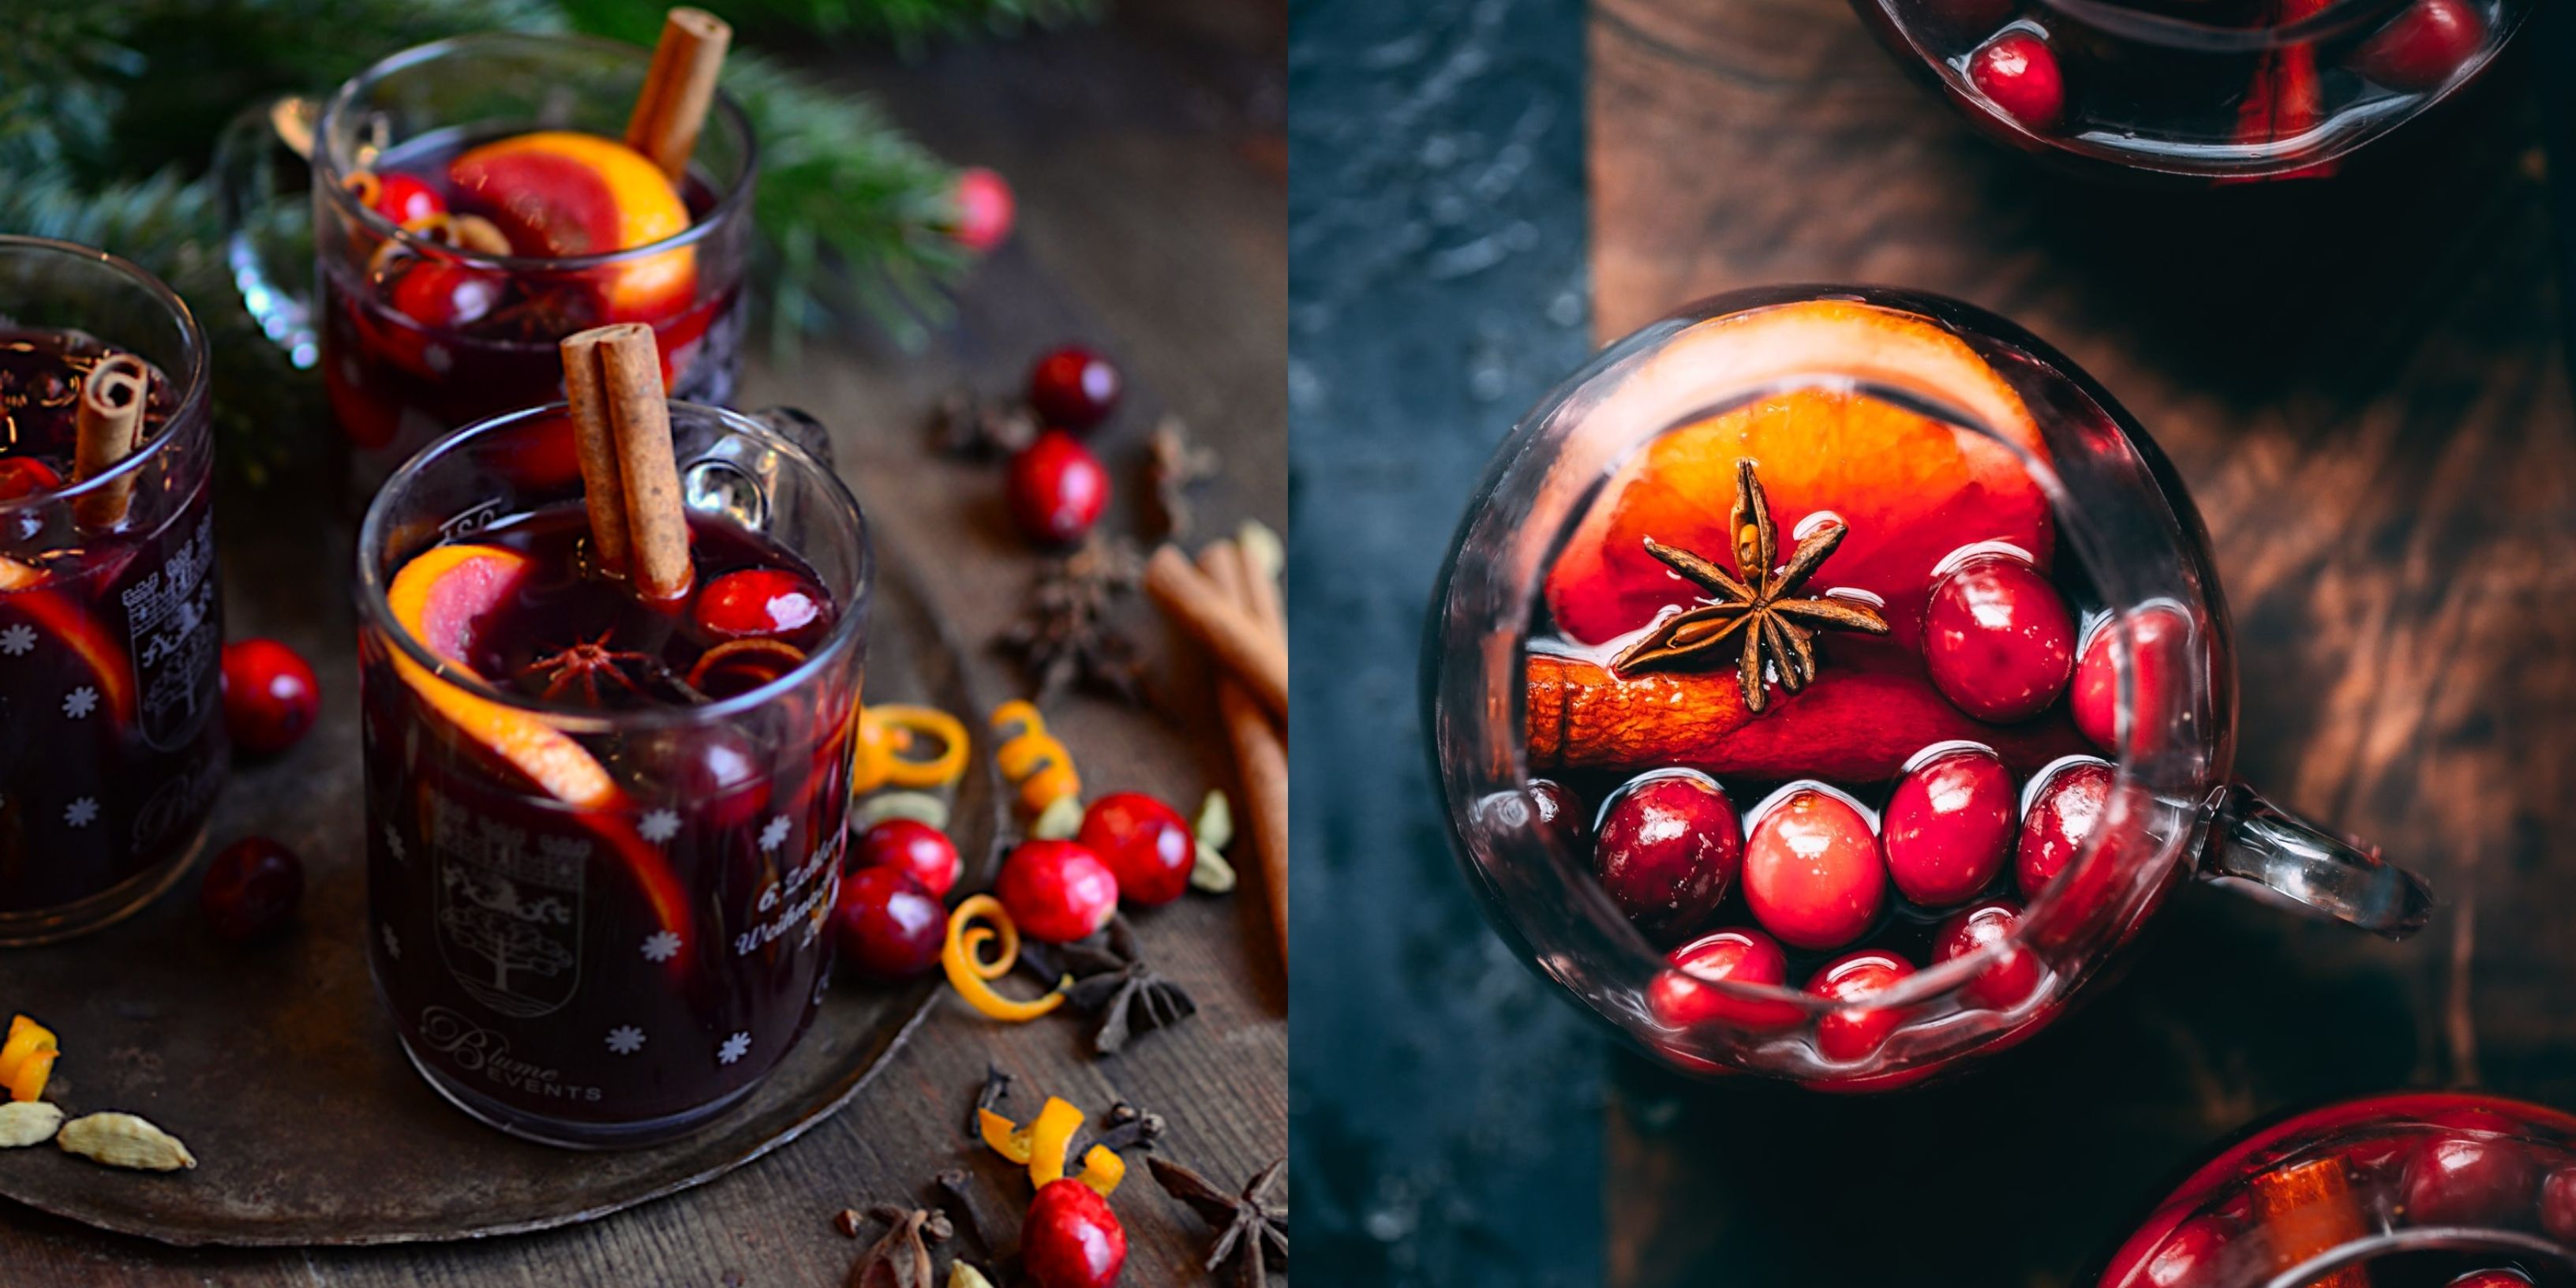 The Best Mulled Wine Recipe